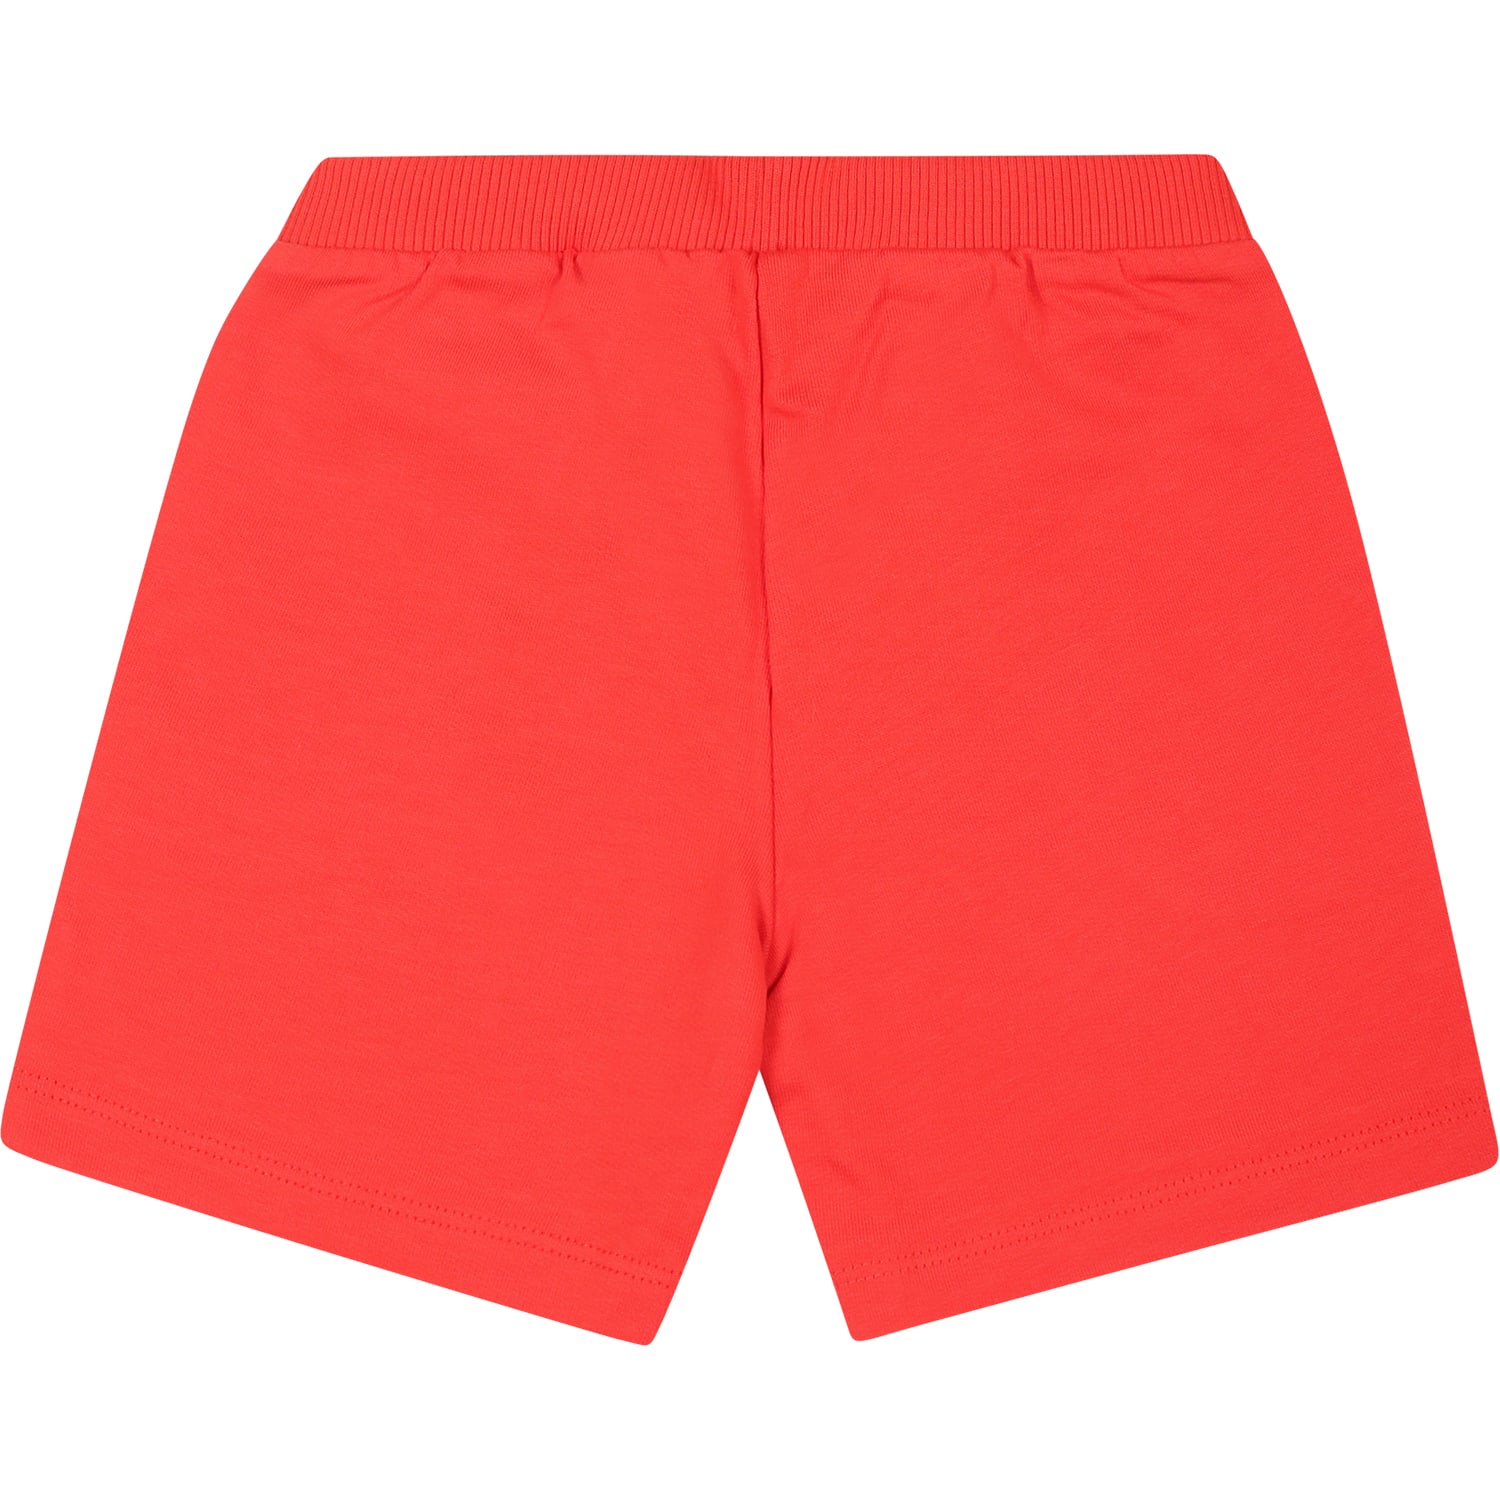 Shop Moschino Red Shorts For Baby Boy With Teddy Bears And Logo